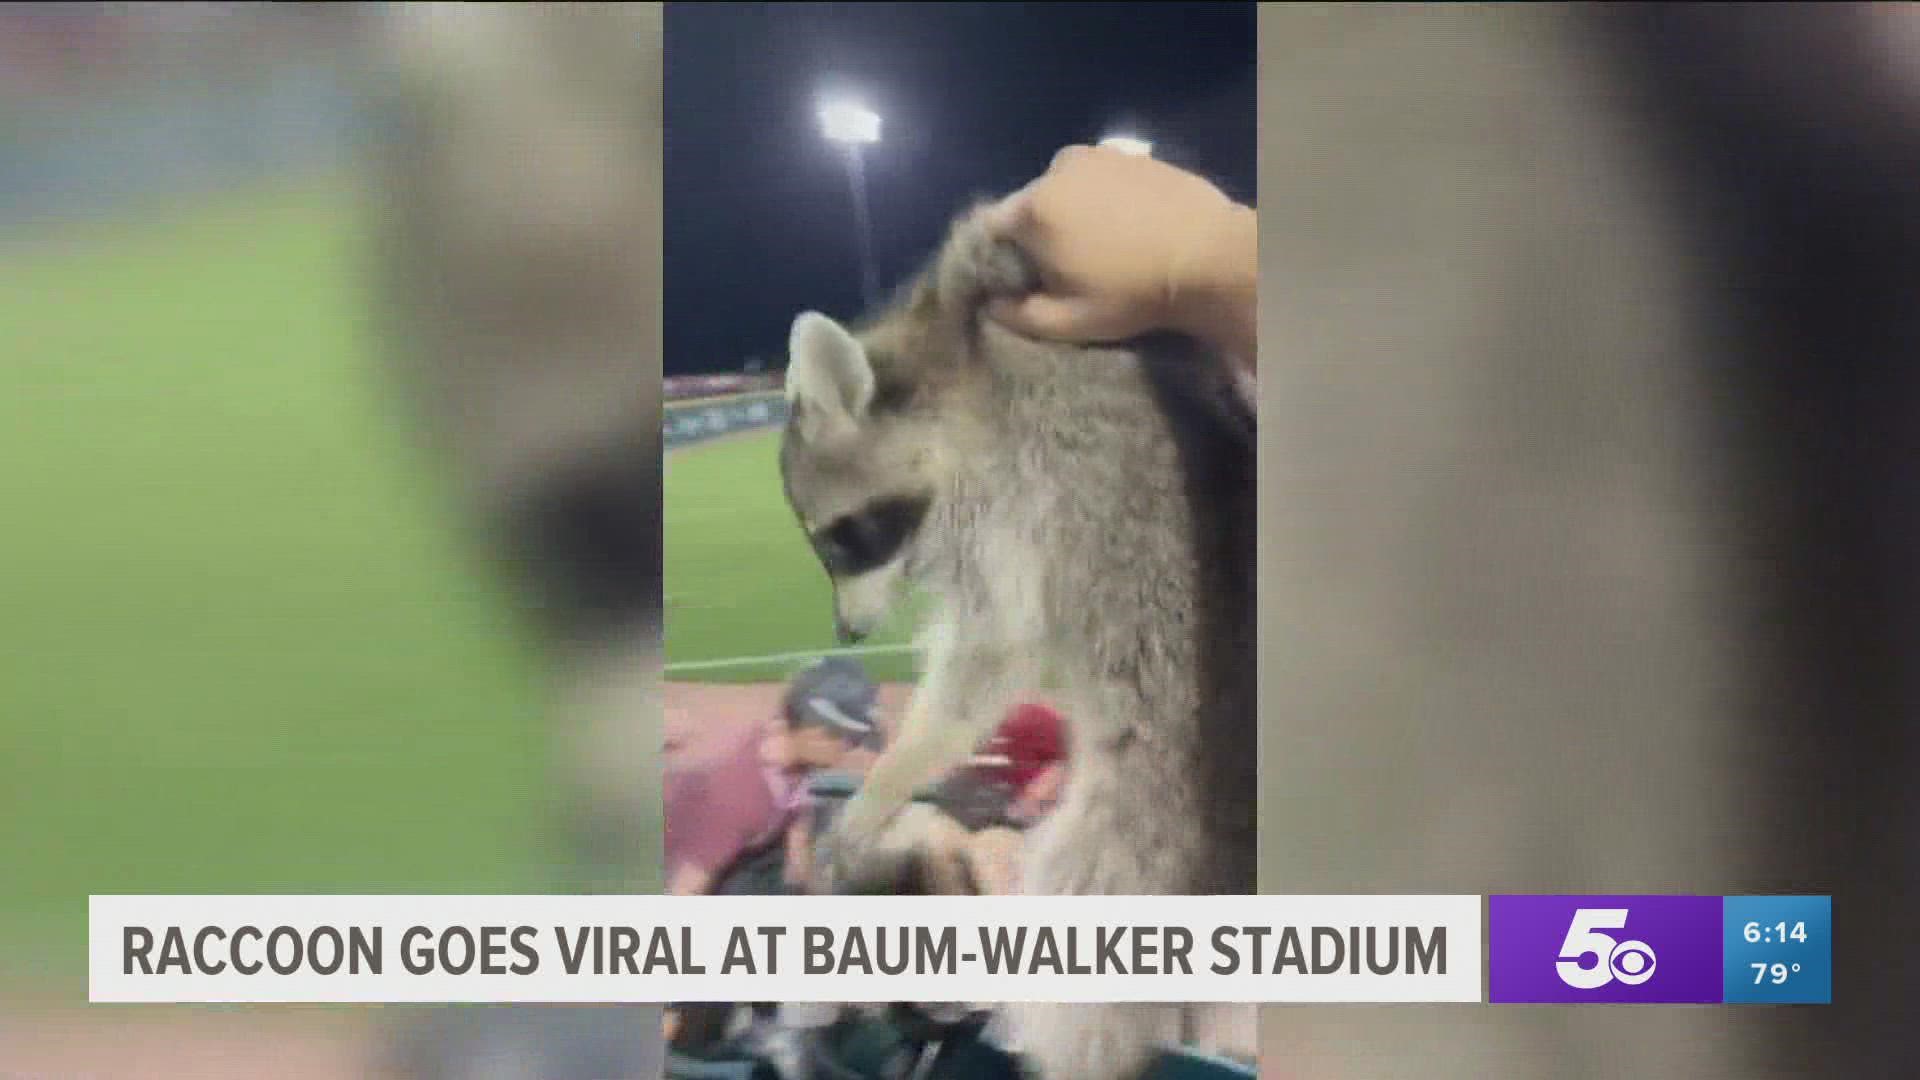 An Arkansas Razorbacks fan has gone viral after catching a raccoon with his bare hands in the stands of Baum Walker Stadium.